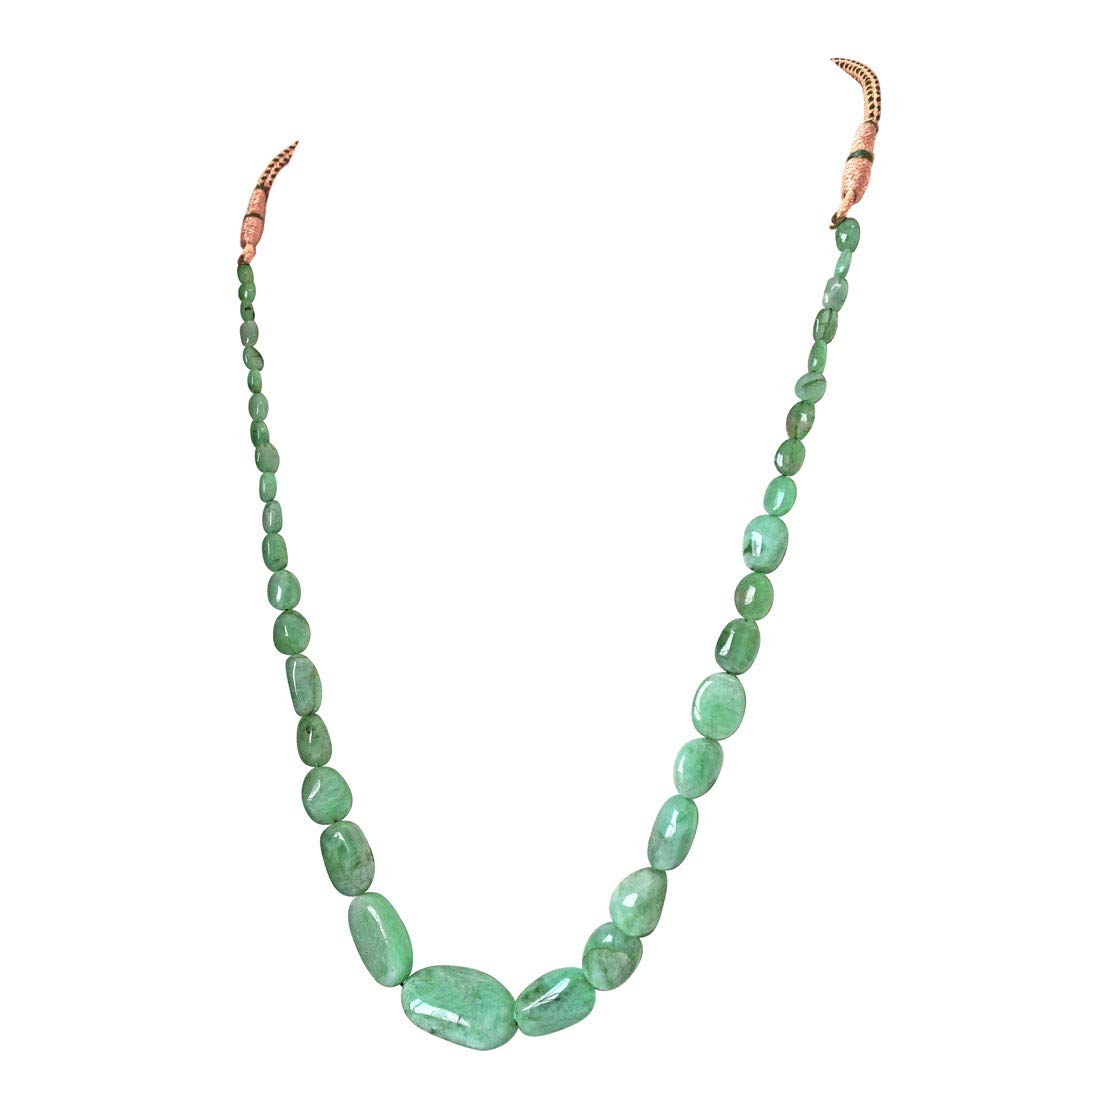 109.56cts Single Line Big Real Natural Light Green Oval Emerald Necklace for Women (109.56cts EMR Neck)